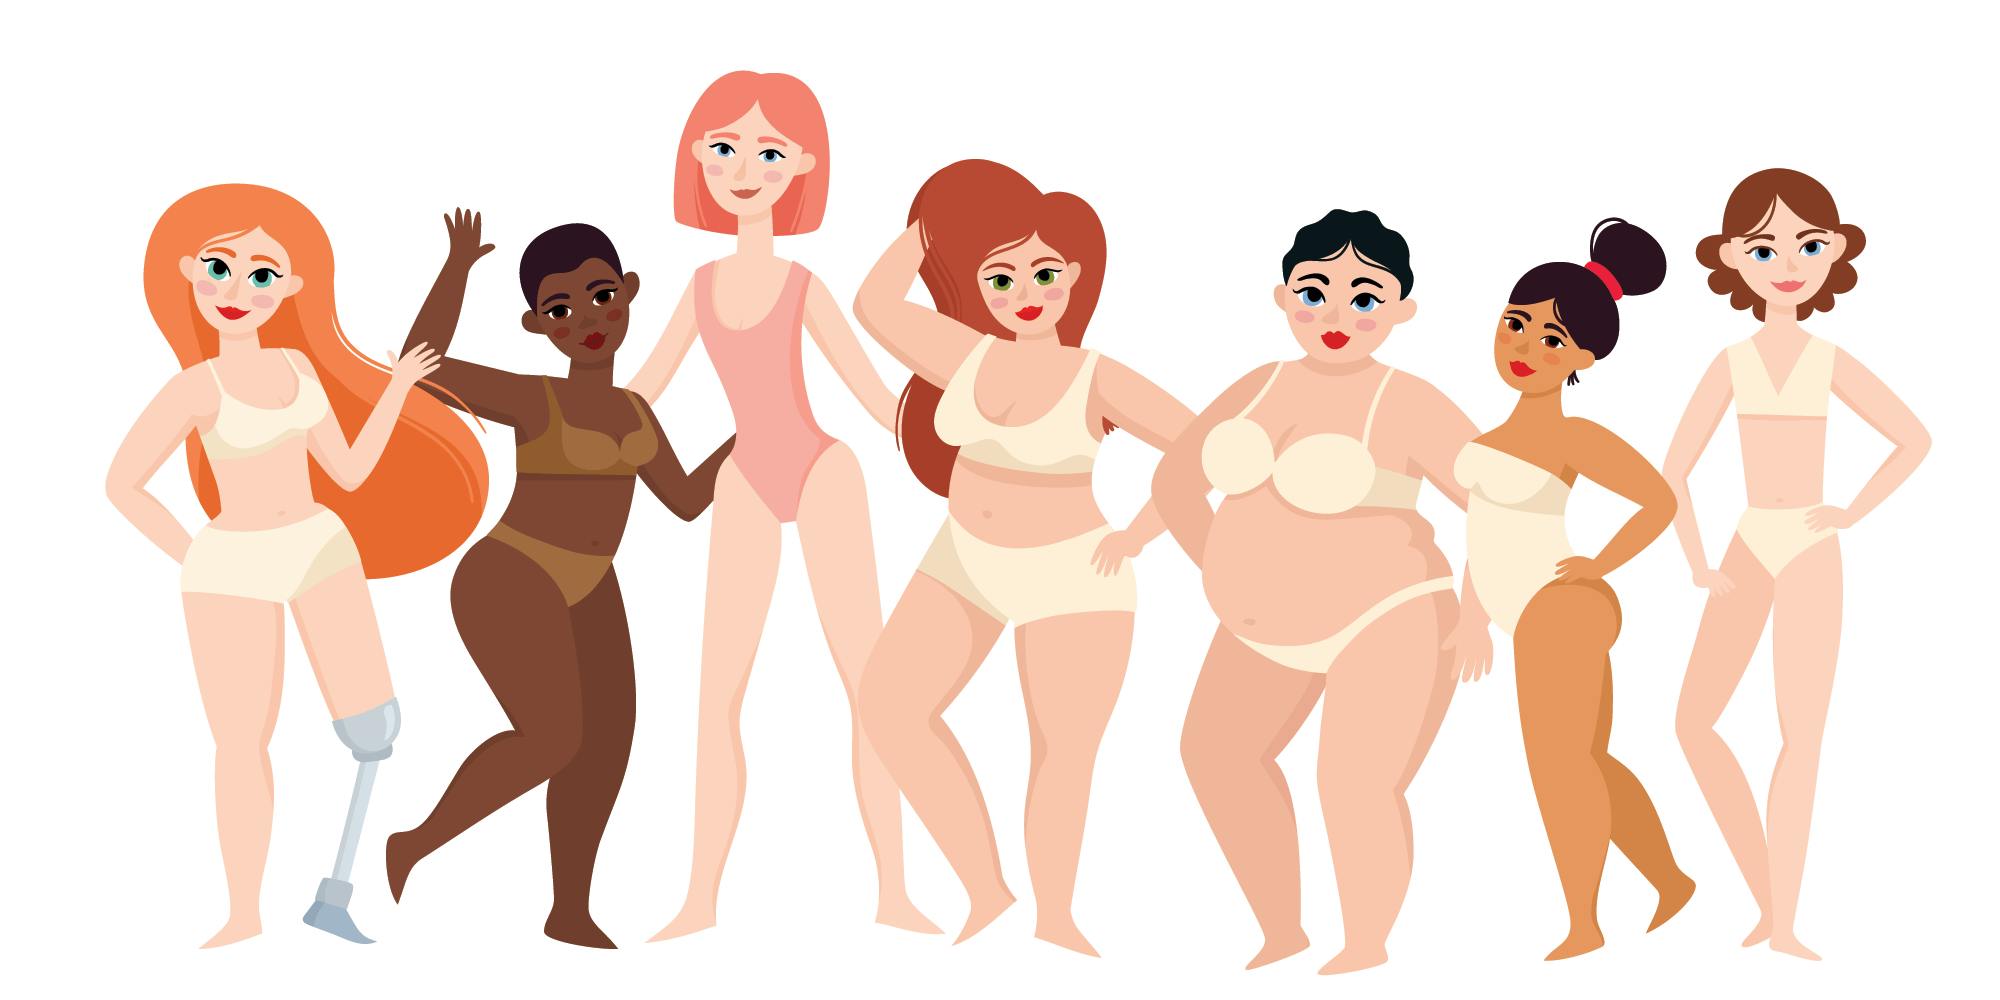 The Body Positive